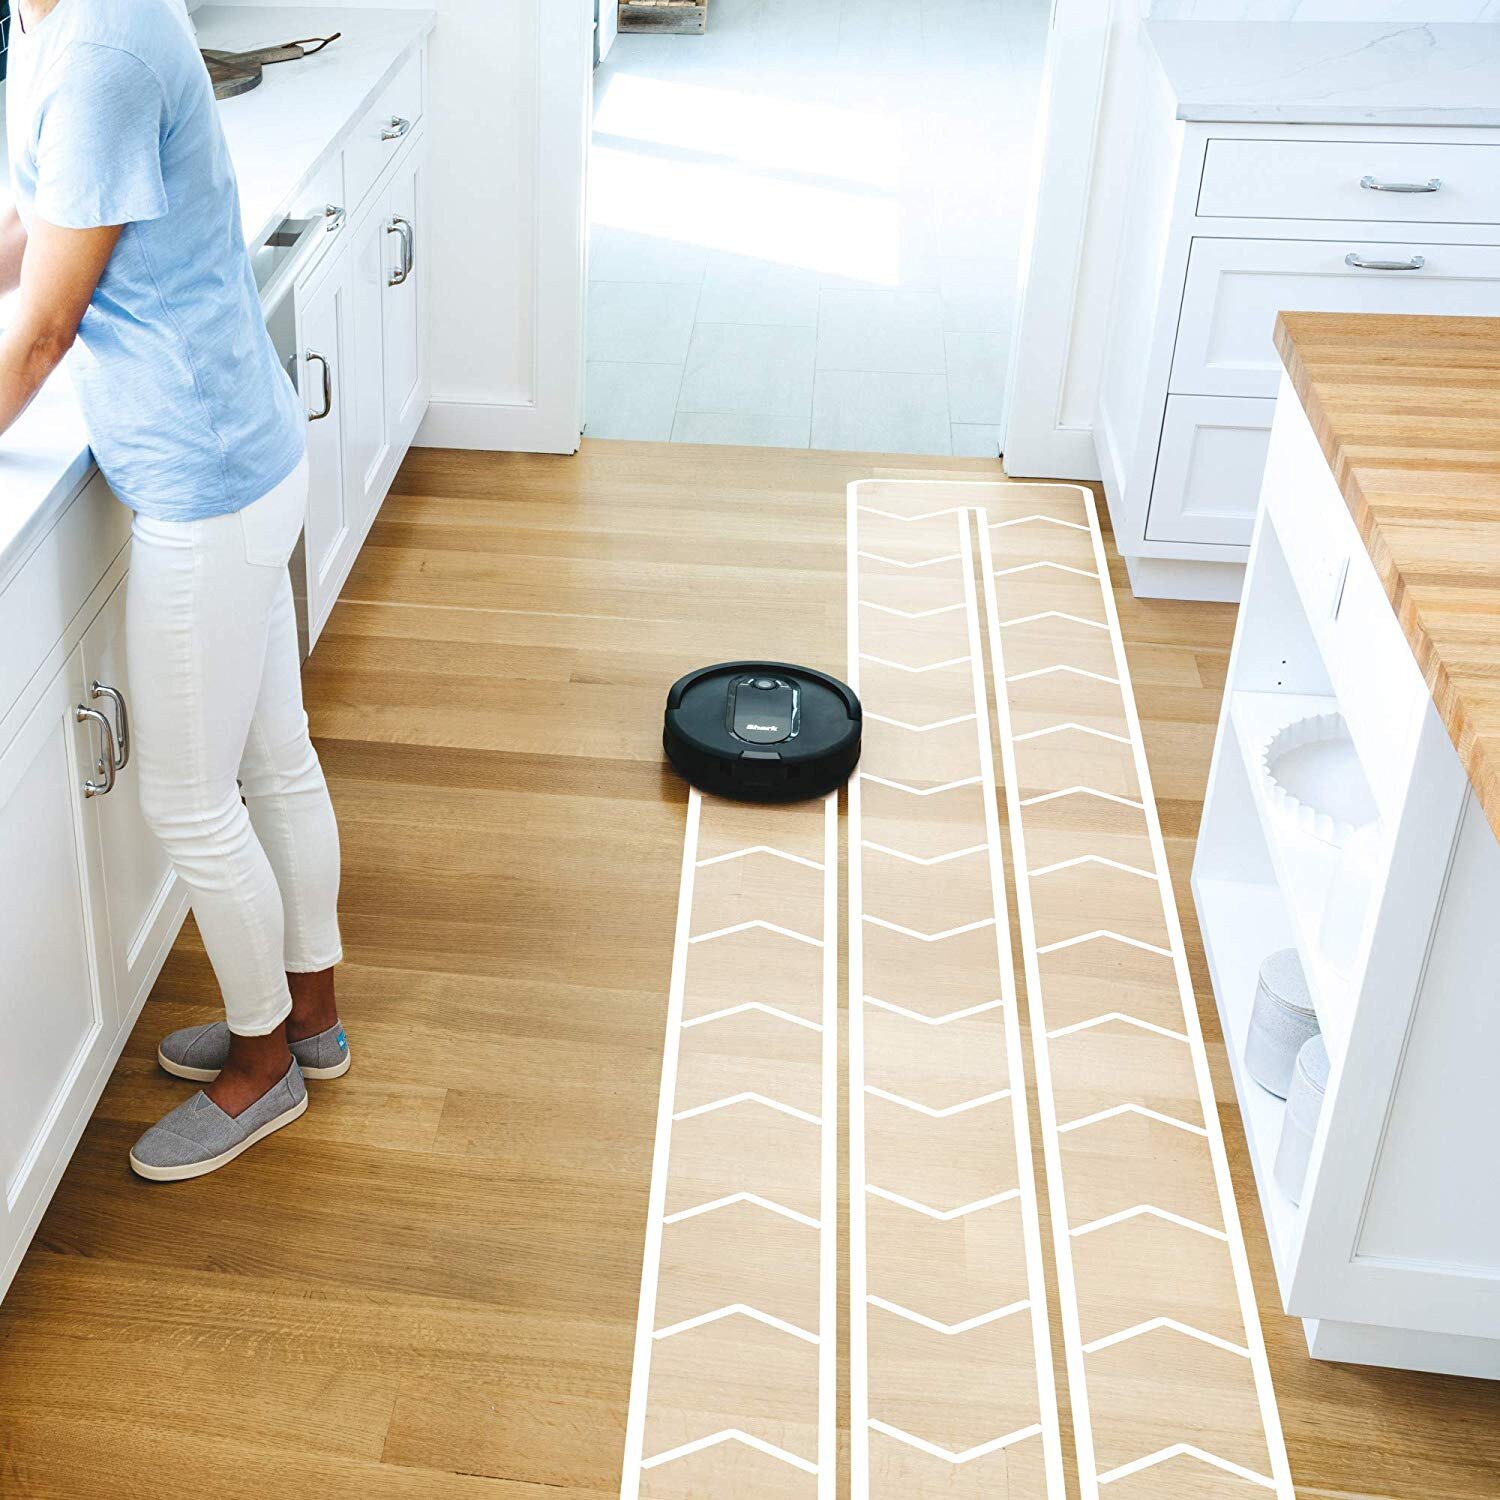 Best Robot Vacuums For Laminate Floors, The Best Vacuum For Laminate Floors